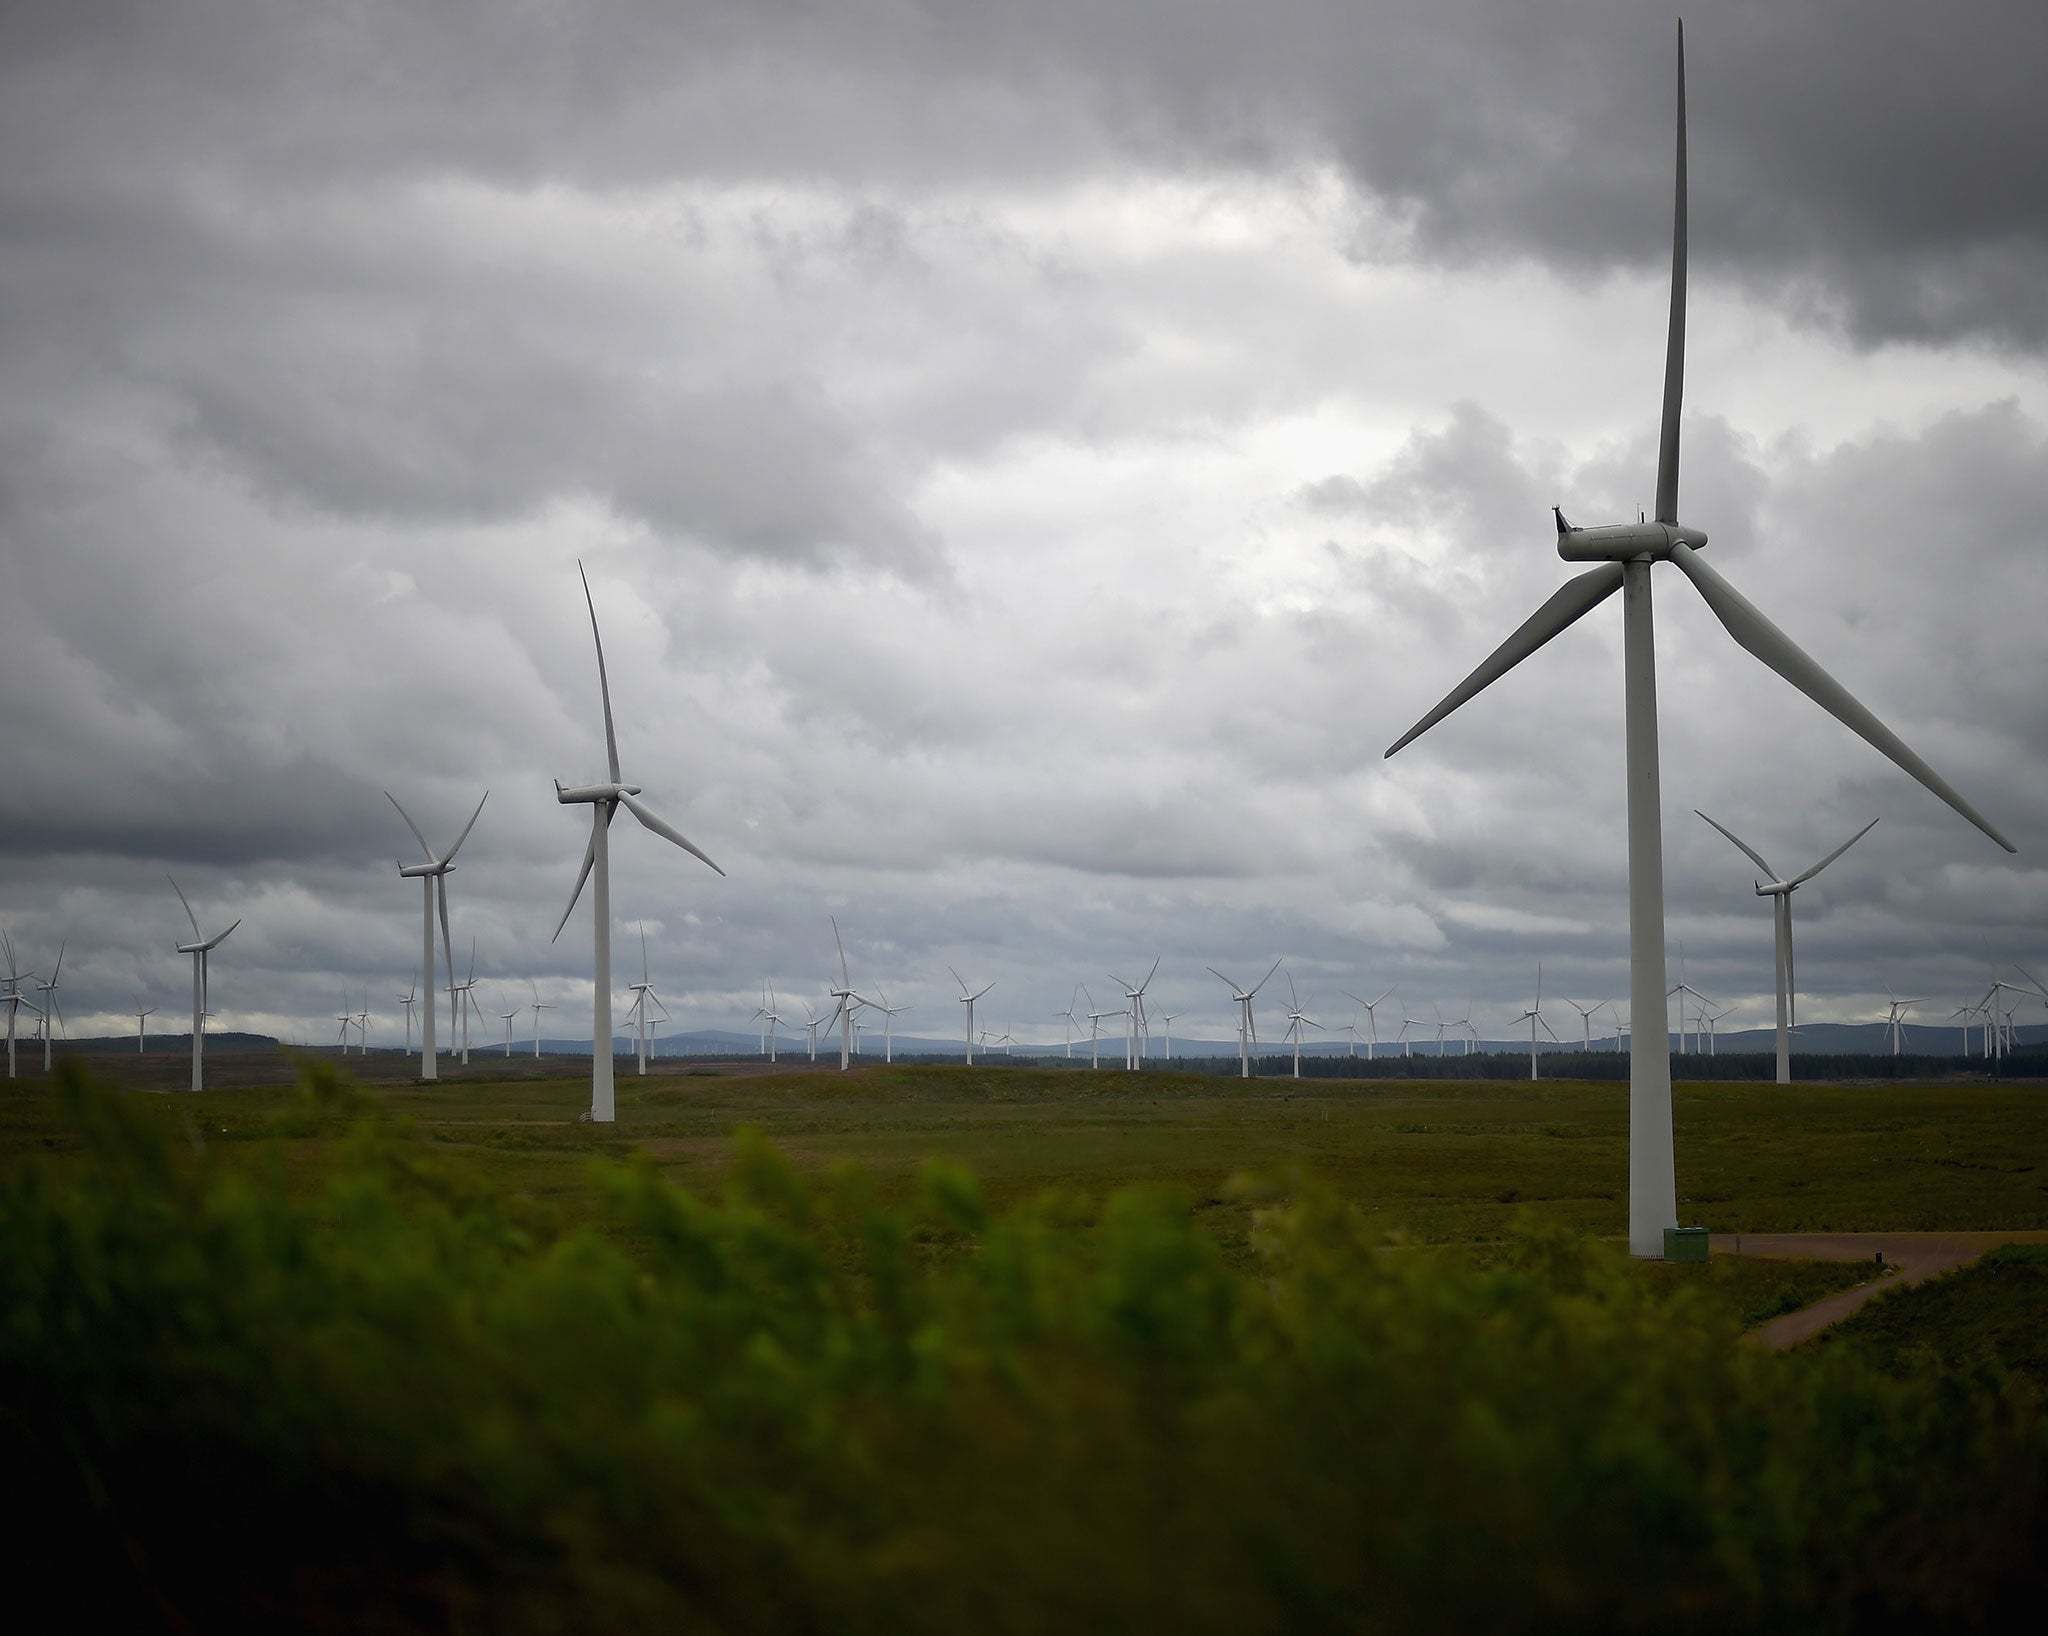 The UK is set to miss its renewable energy targets, say MPs